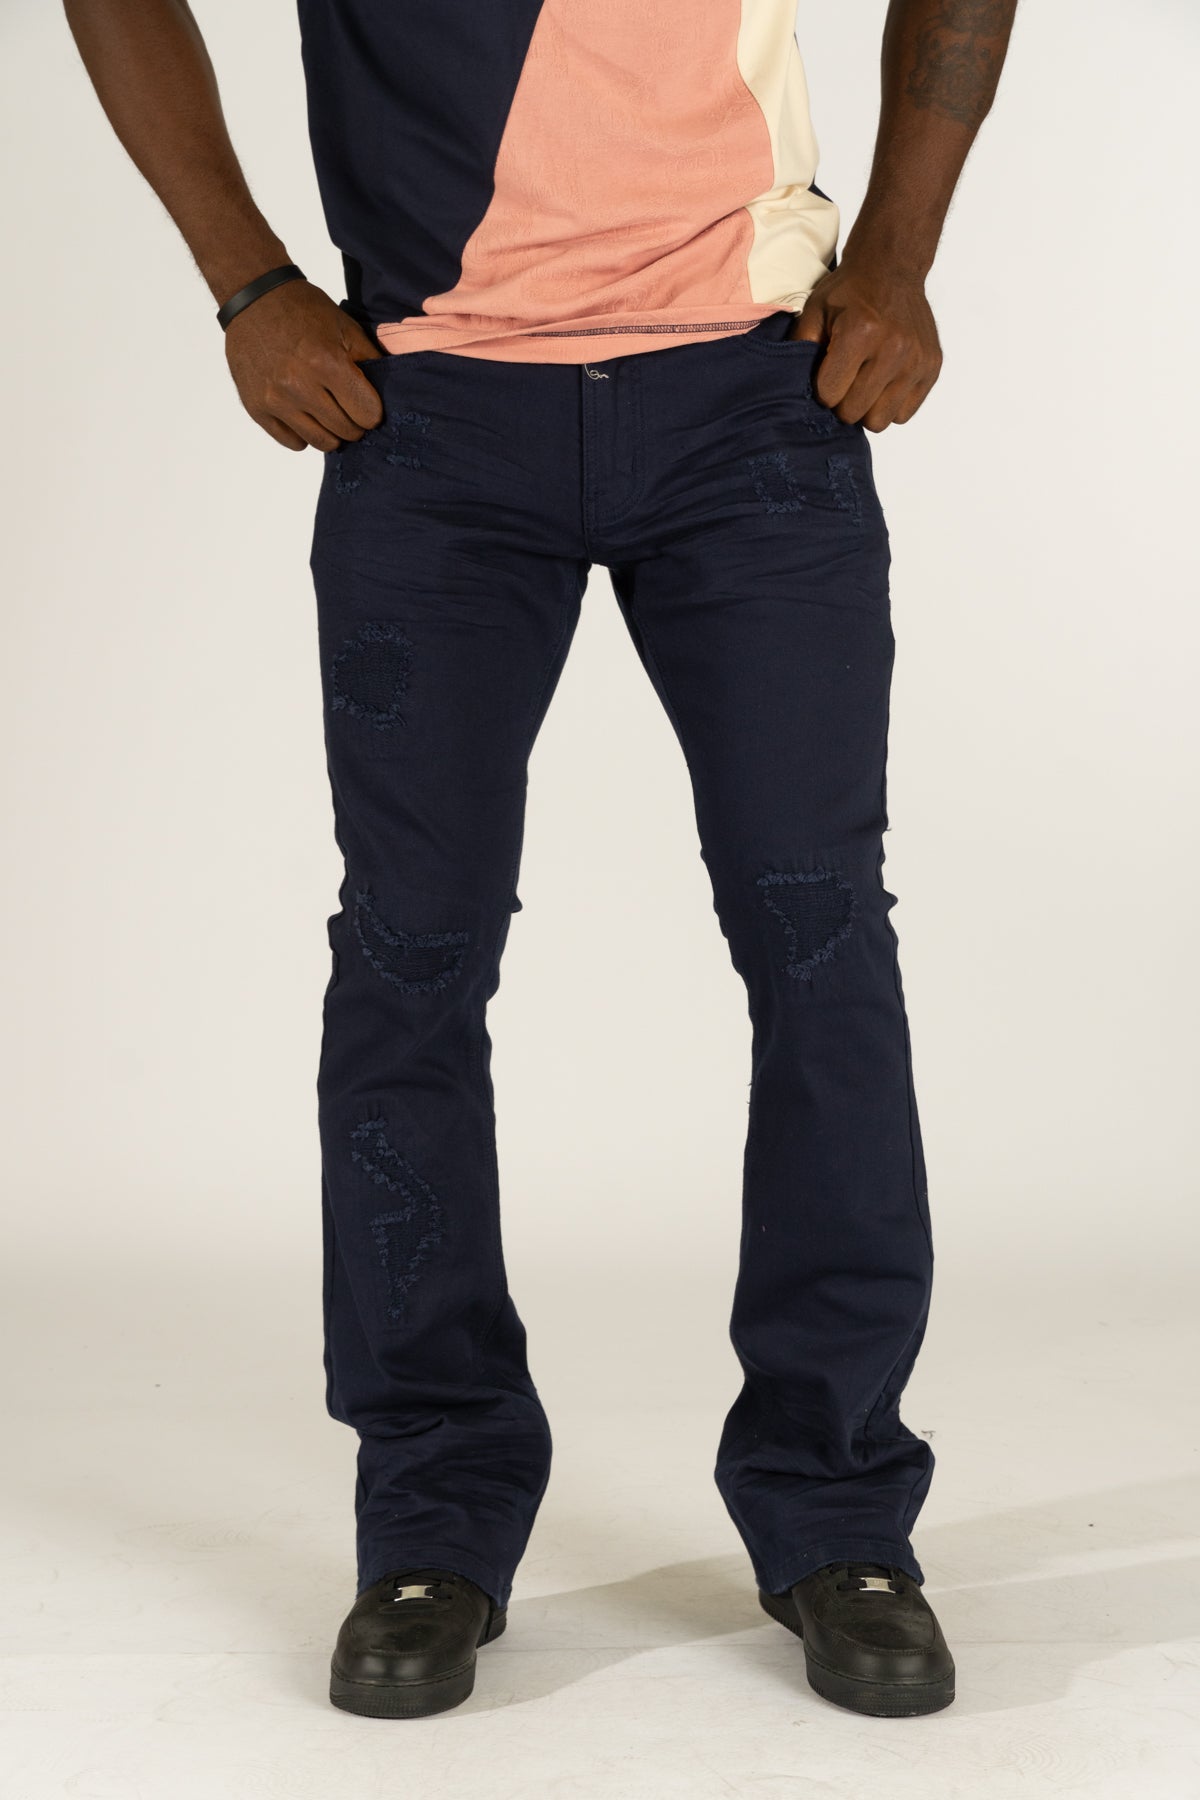 M1948 Benini Twill Stacked Jeans - Navy